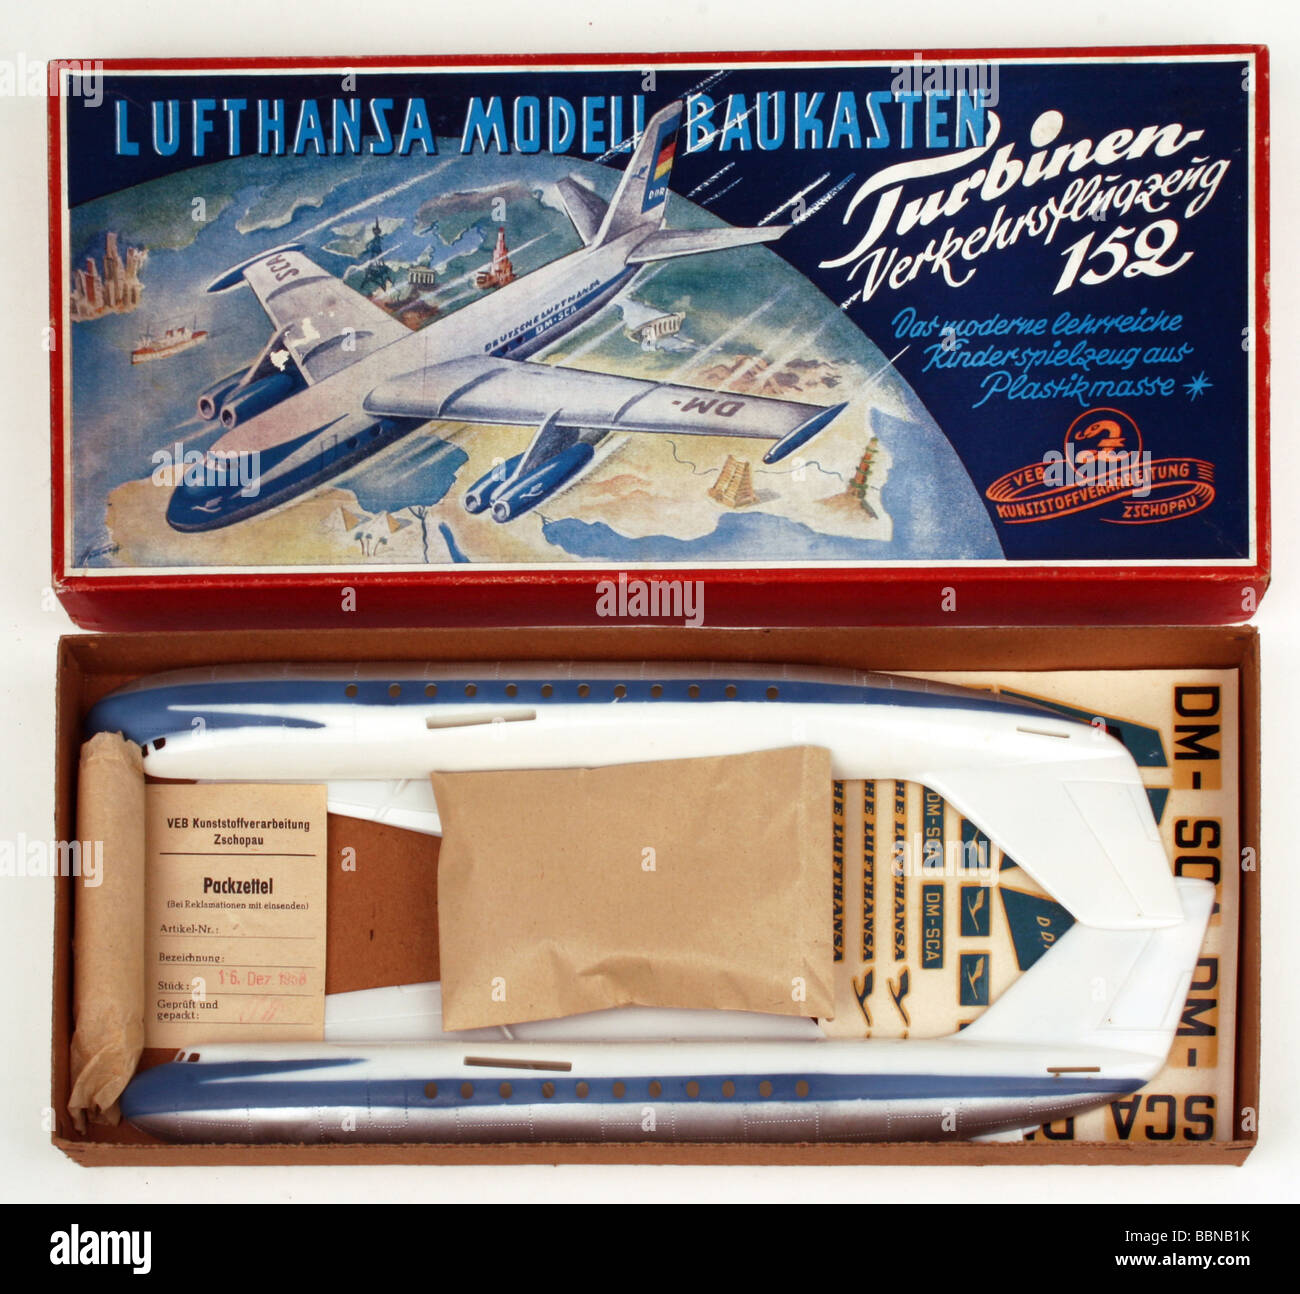 toys, construction sets, typ kit DDR jet plane B 152, made by VEB Kunststoffverarbeitung Zschopau, GDR, 1958, historic, historical, 20th century, DDR, East-Germany, toy, 50s, 1950s, factory design, boxed, box, package, packaging, airplane, Stock Photo